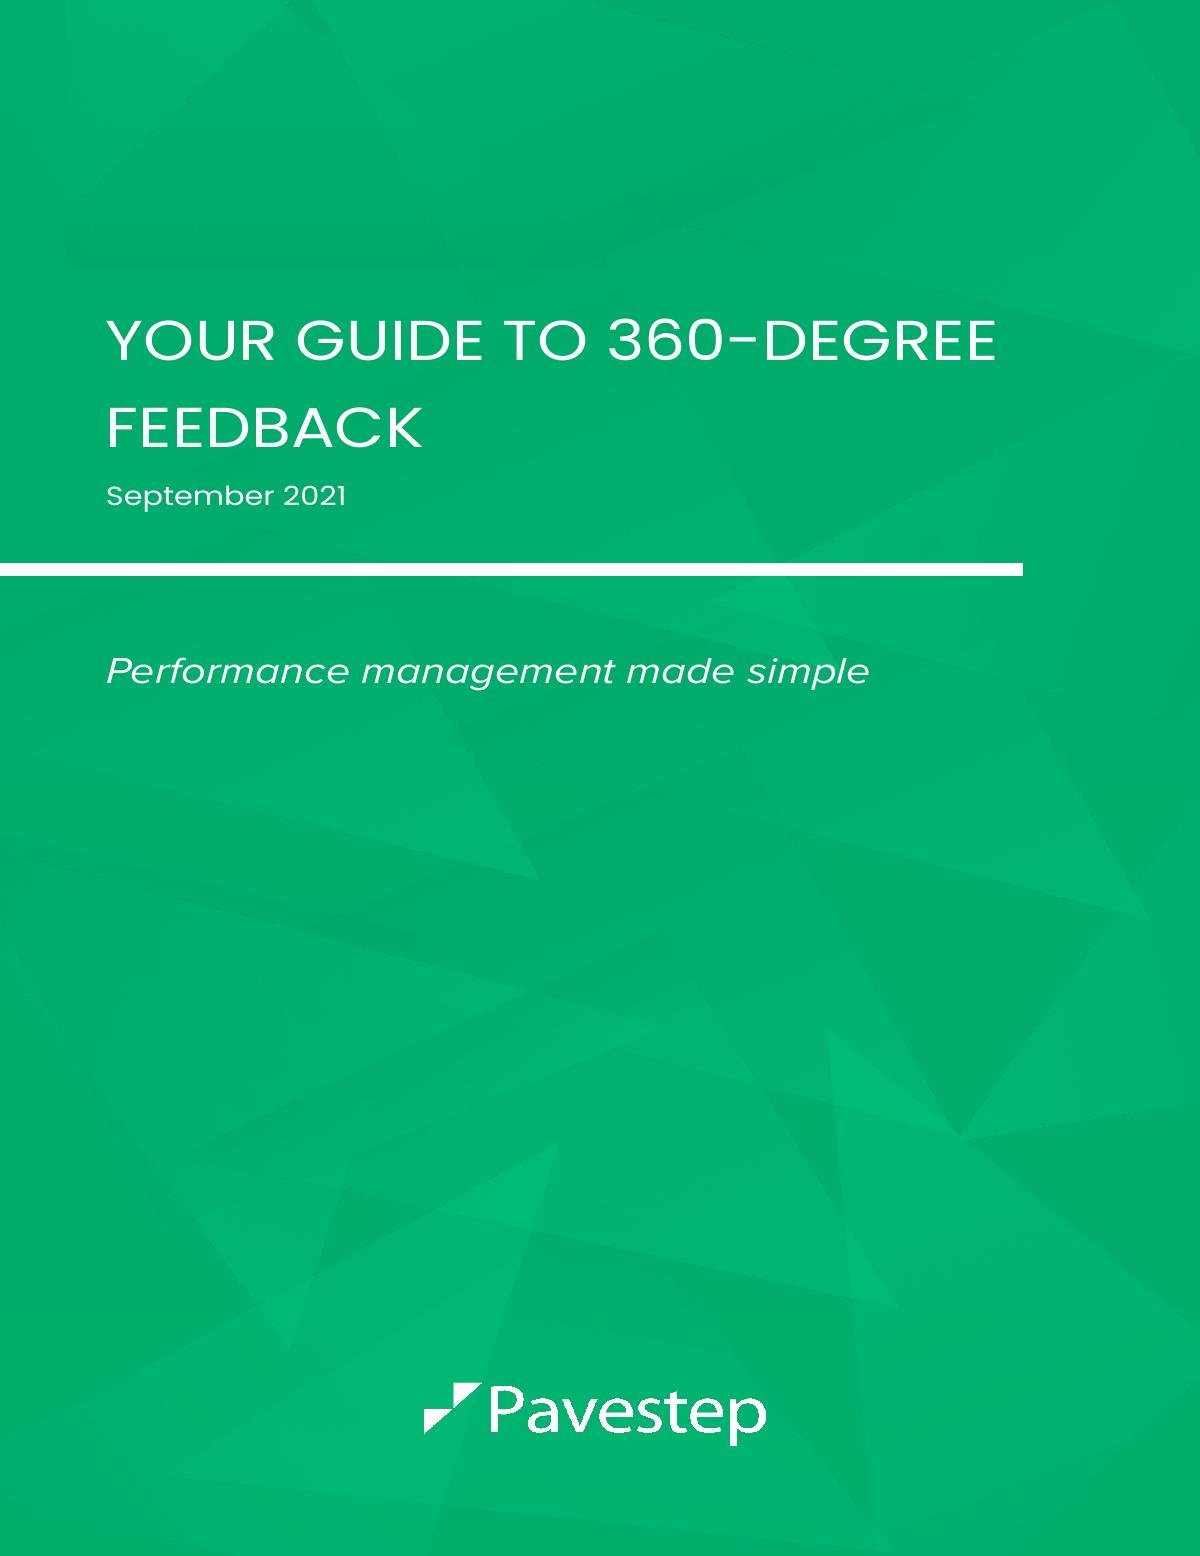 Your Guide to 360-Degree Feedback